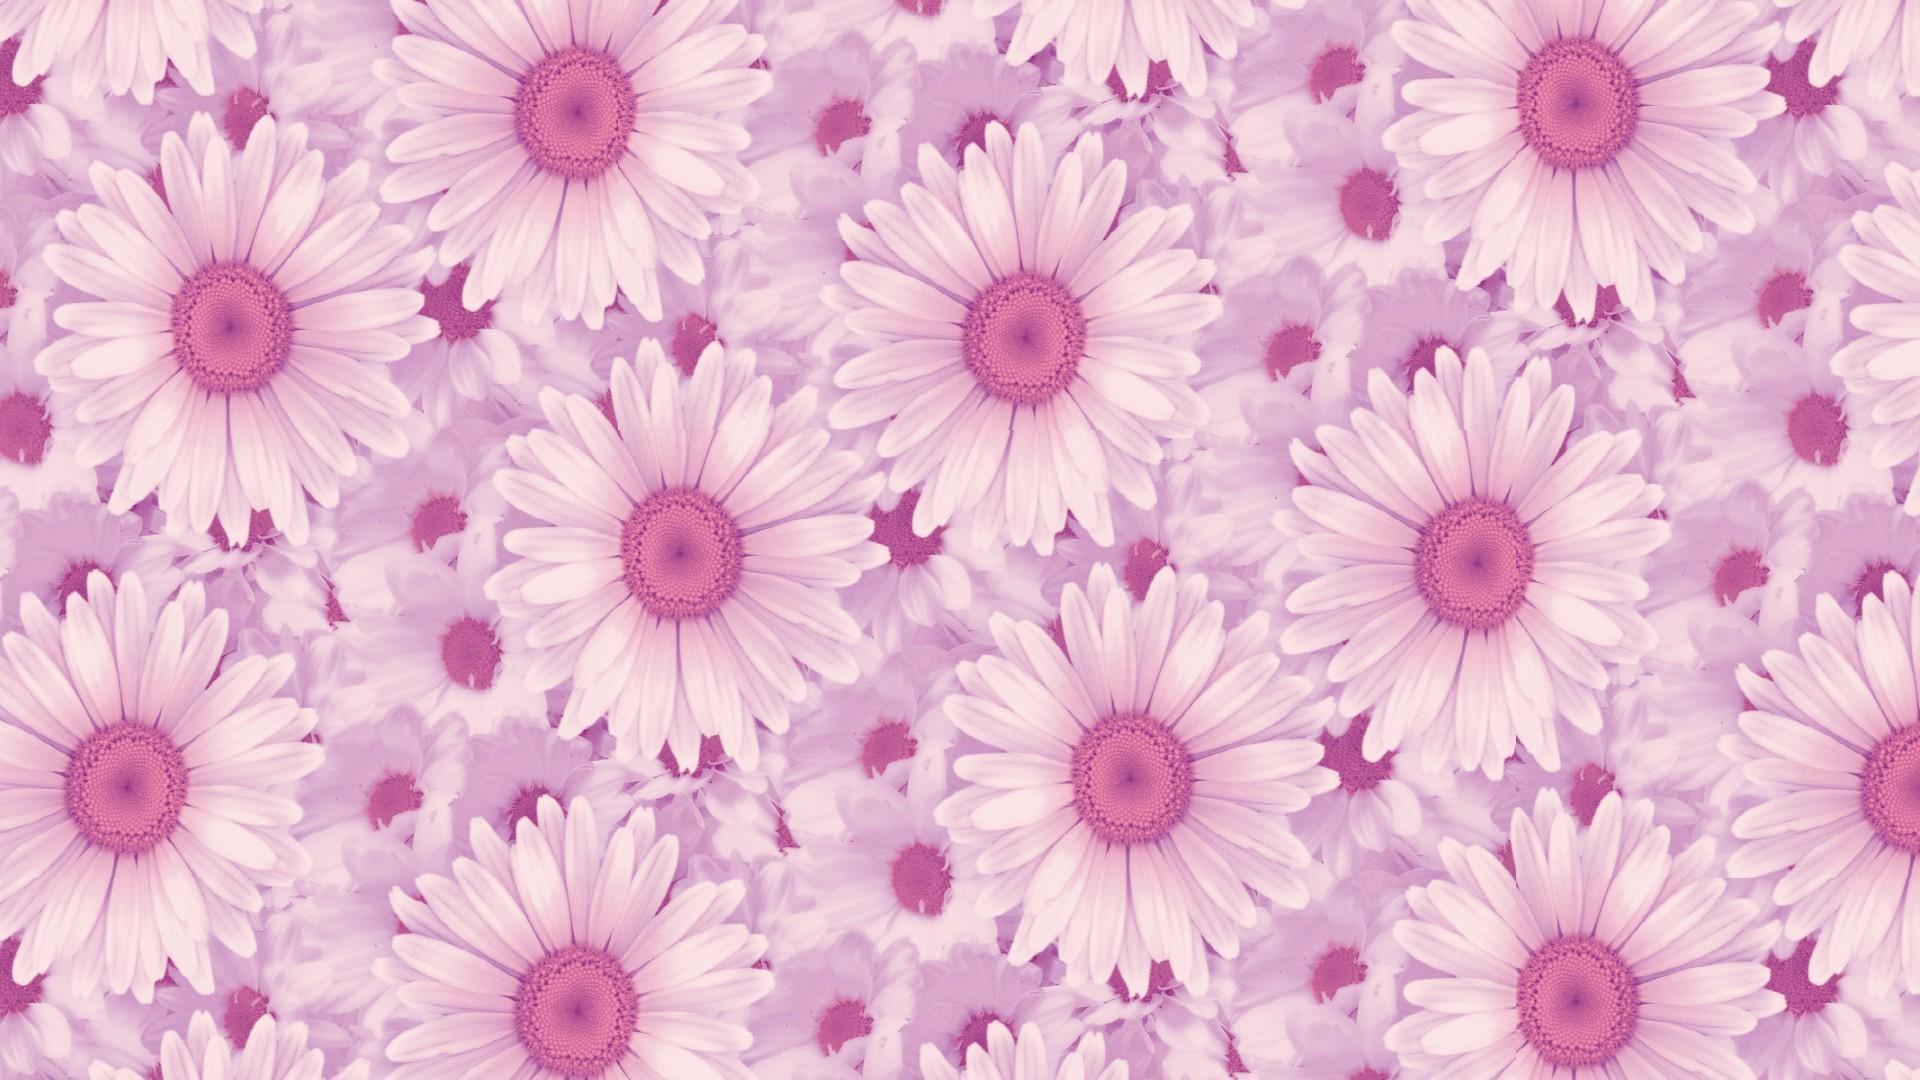 Cute Daisy Wallpapers - Wallpaper Cave